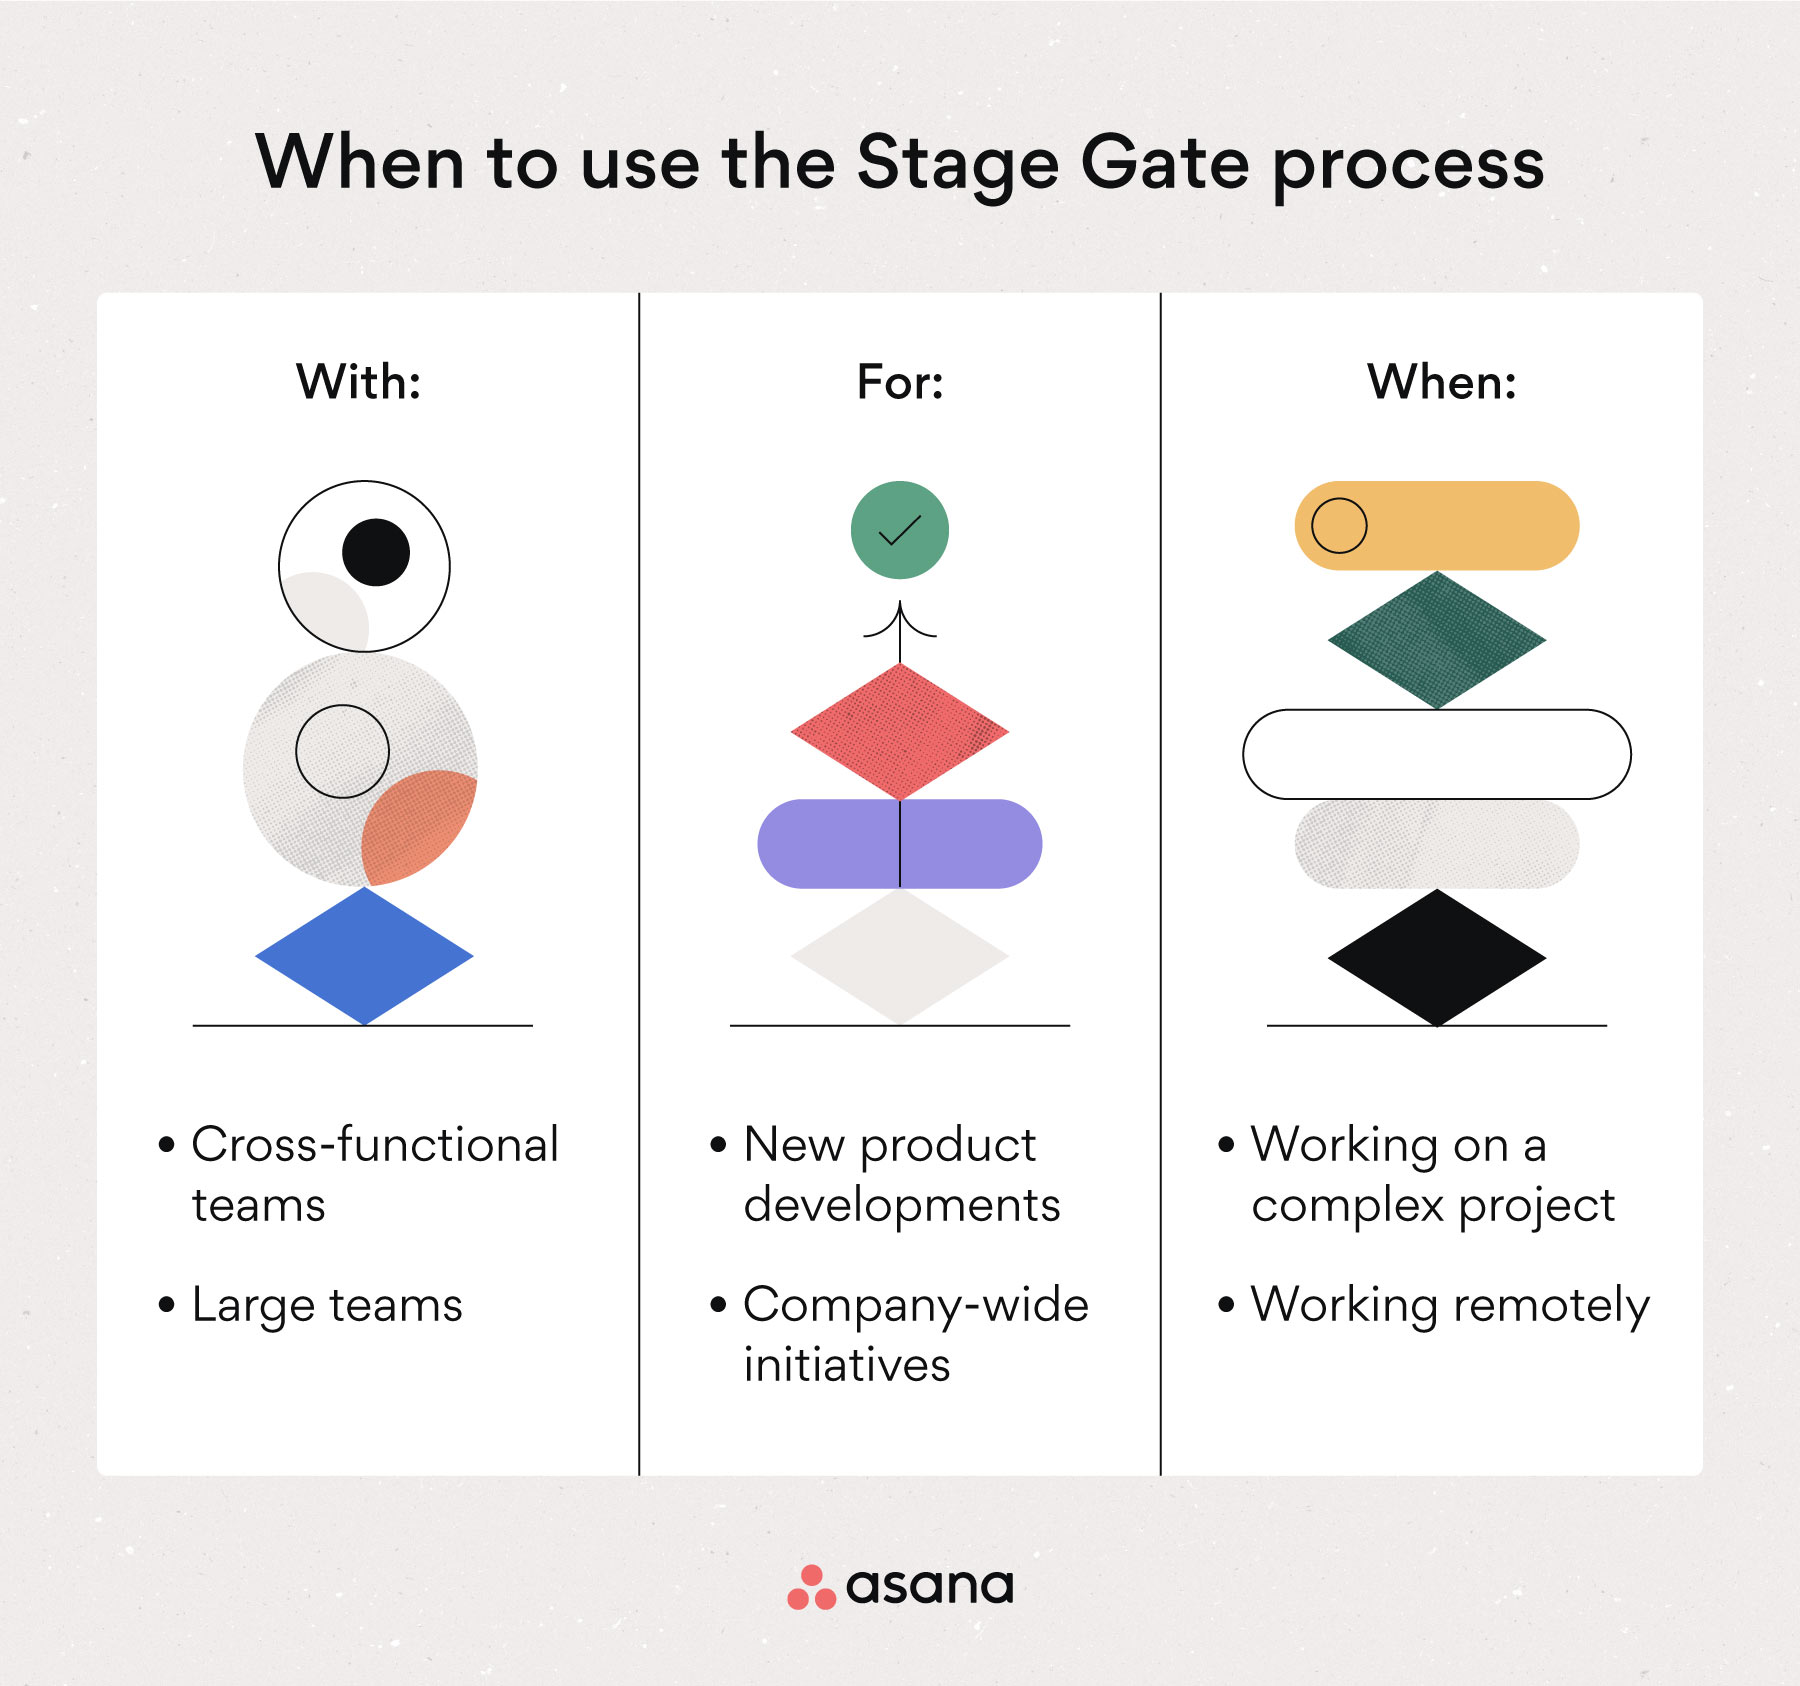 [inline illustration] When to use the Stage Gate process (infographic)